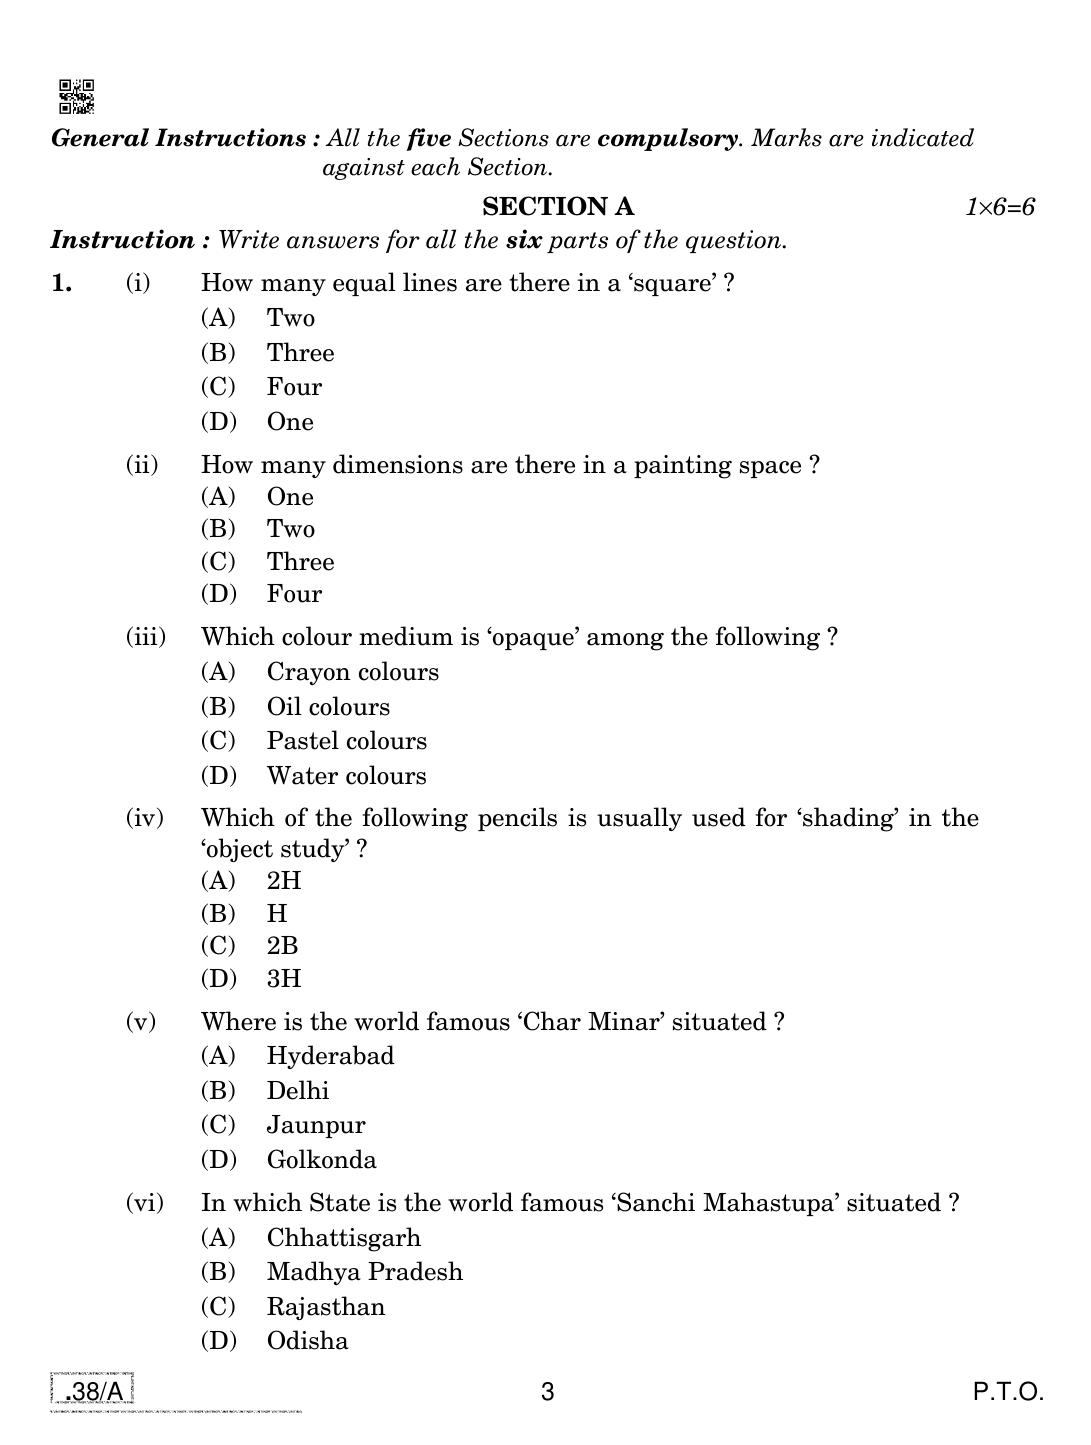 CBSE Class 10 Painting 2020 Compartment Question Paper - Page 3